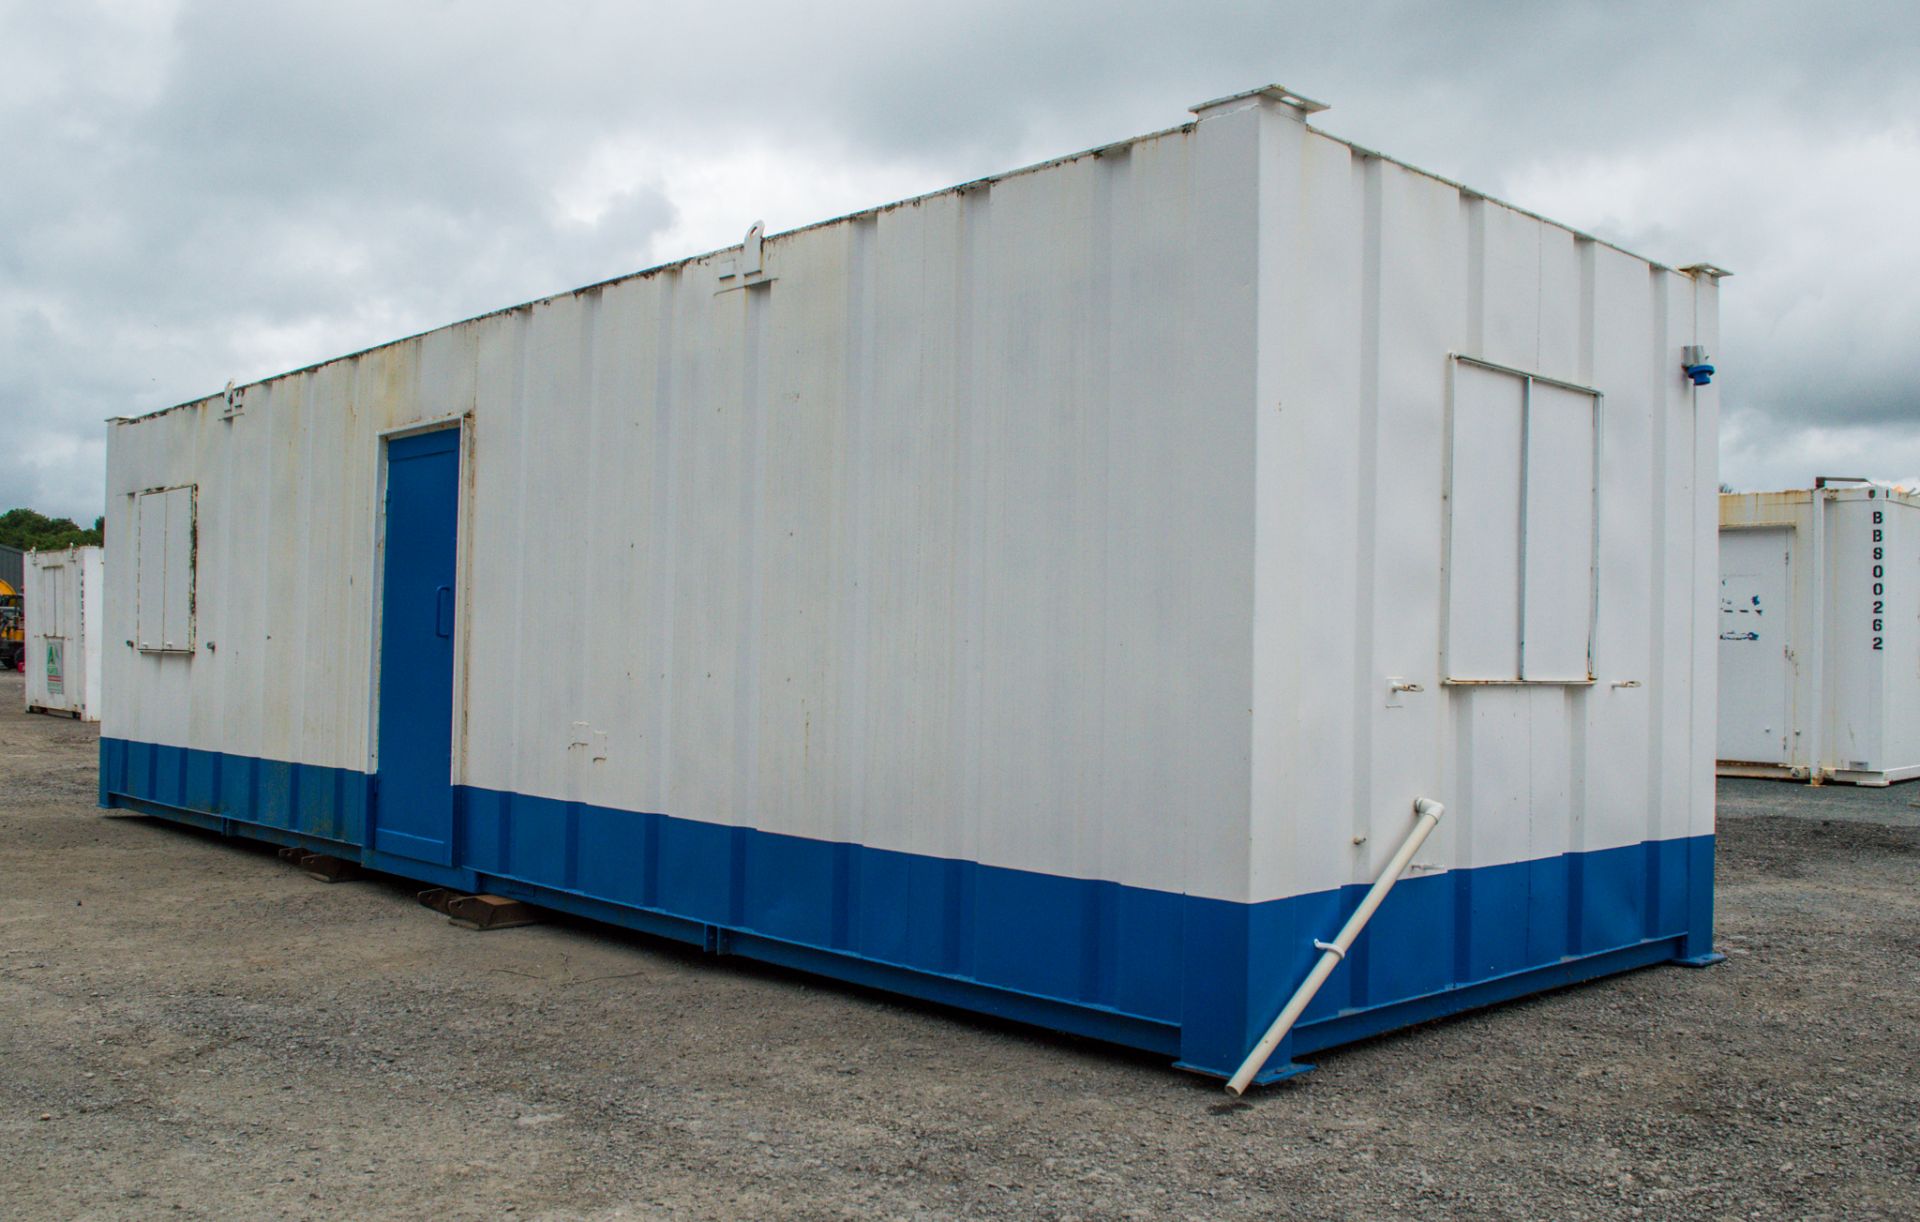 32ft x 10ft steel anti office site unit ** No keys but the doors are unlocked ** GT30212 - Image 2 of 6